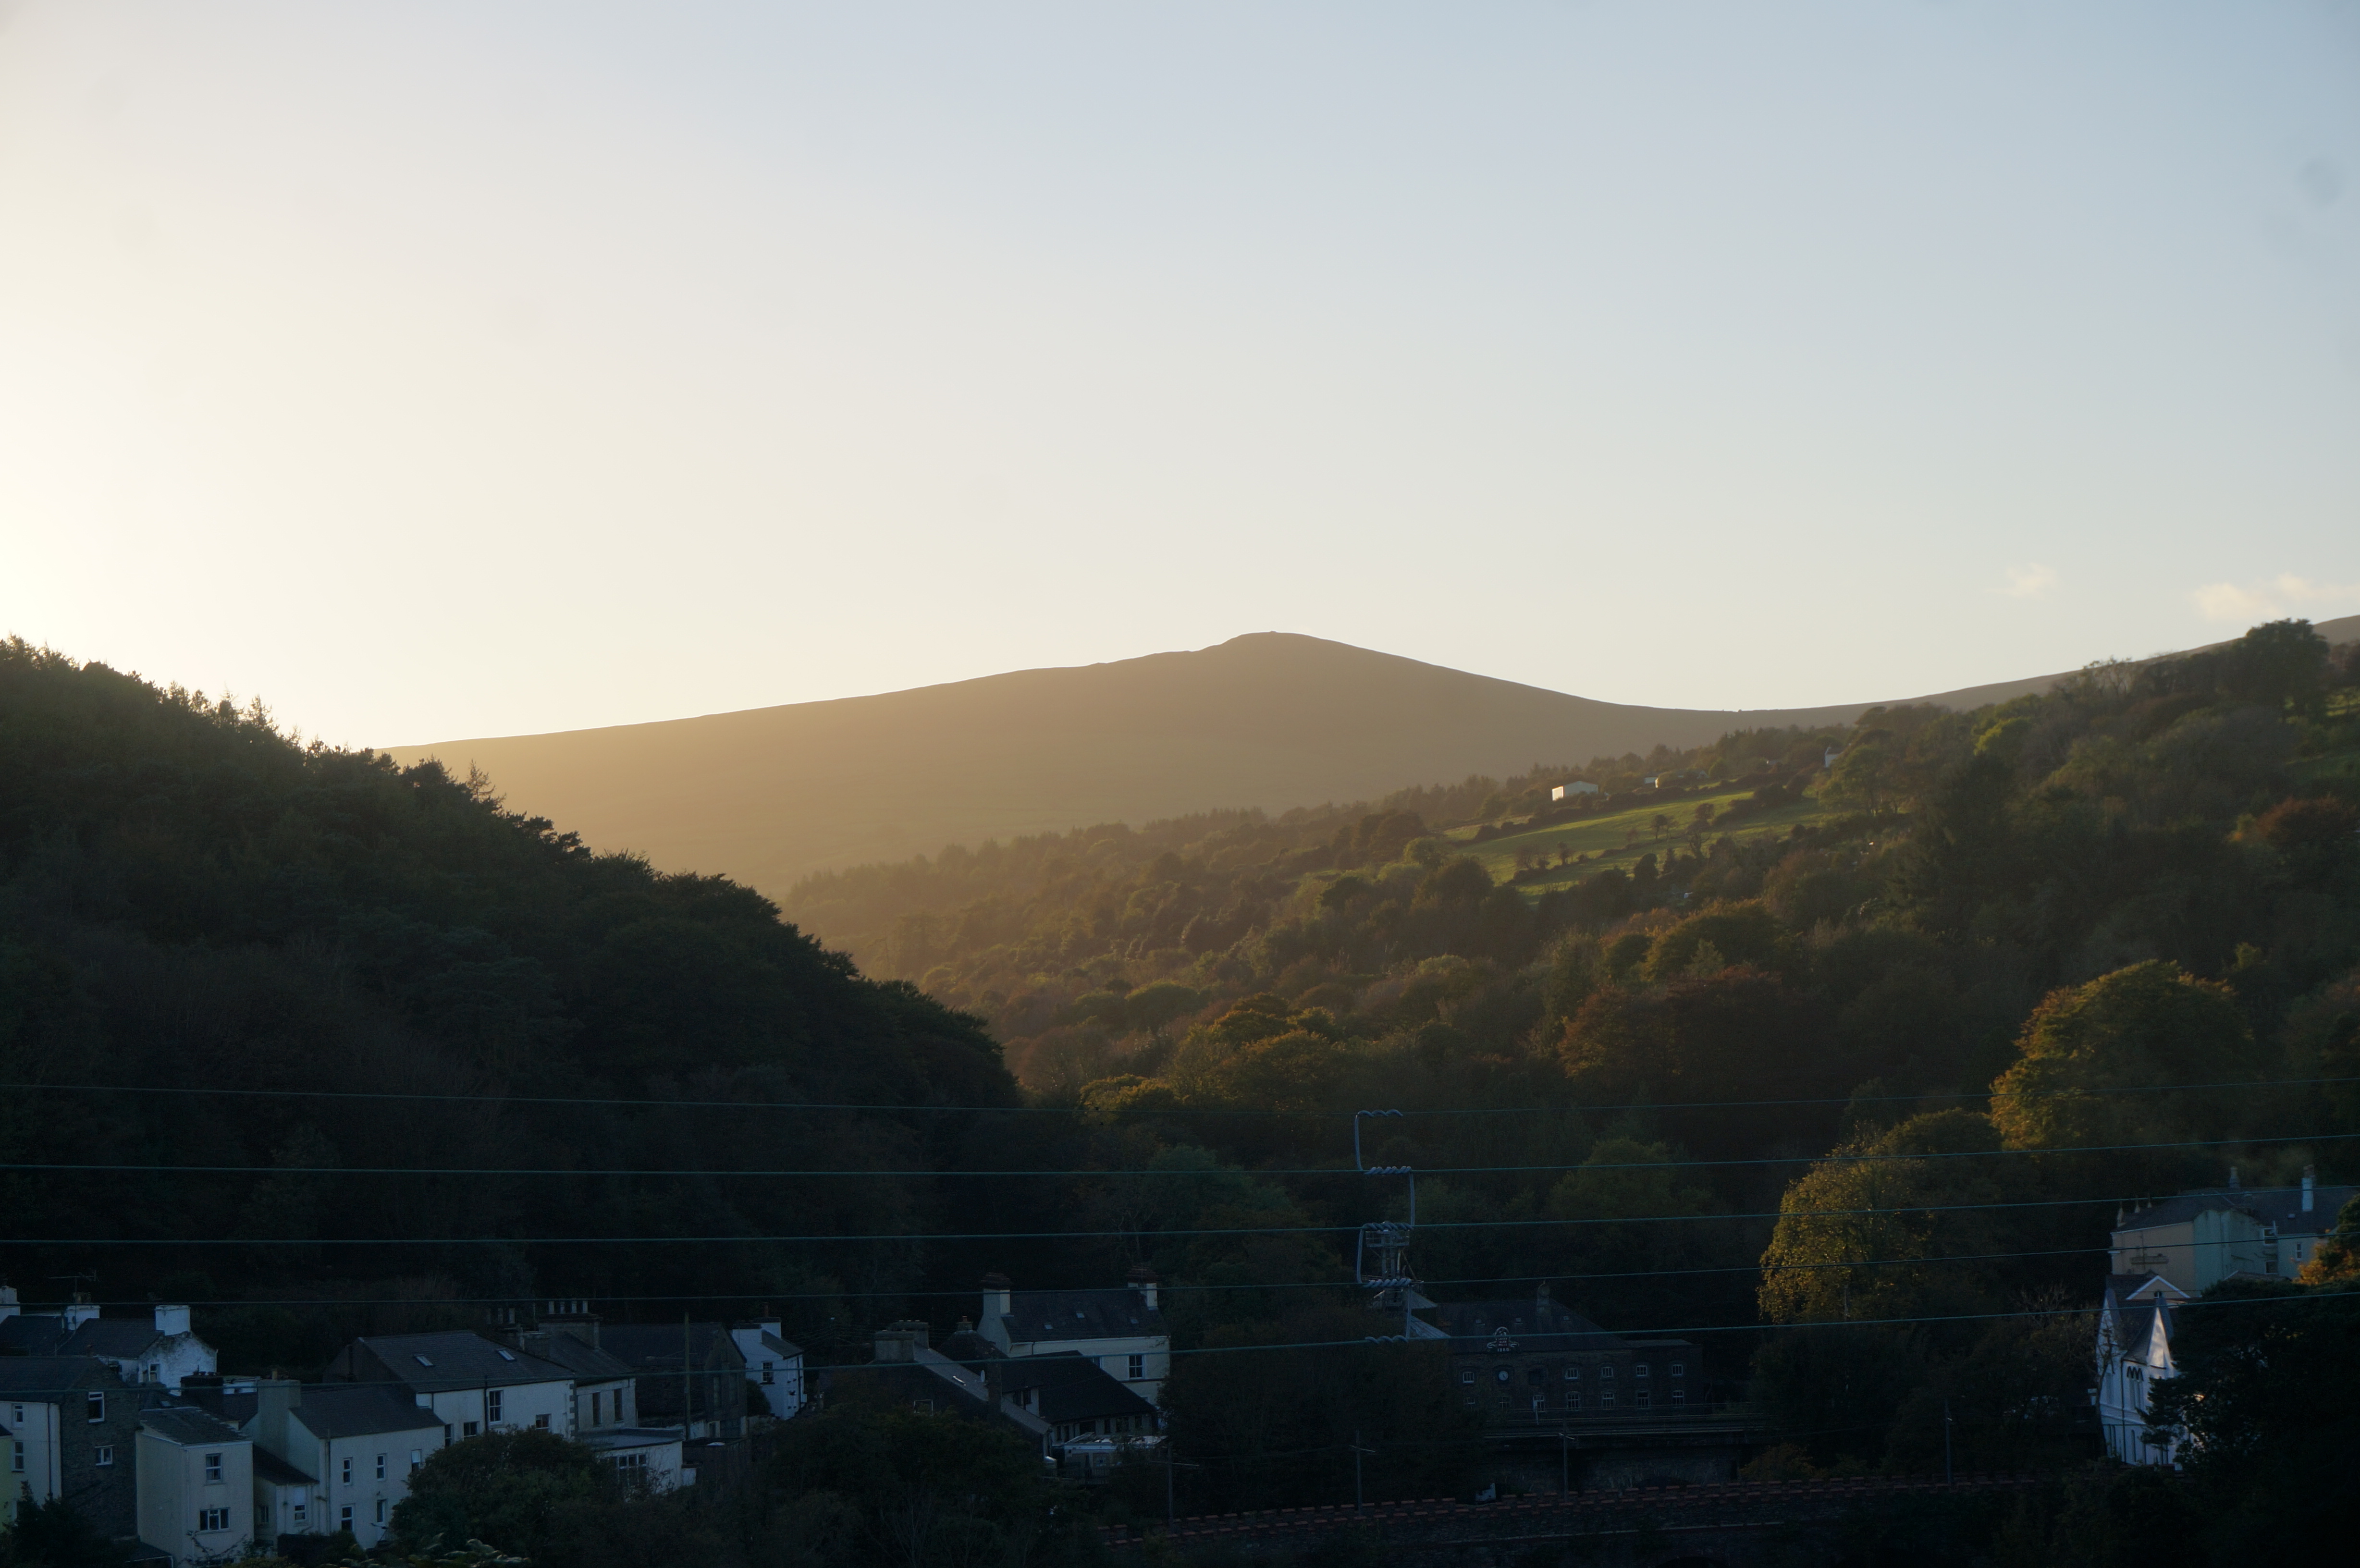 The view up the valley to the hills from our Isle of Man house as the sun sets on the west side of the island